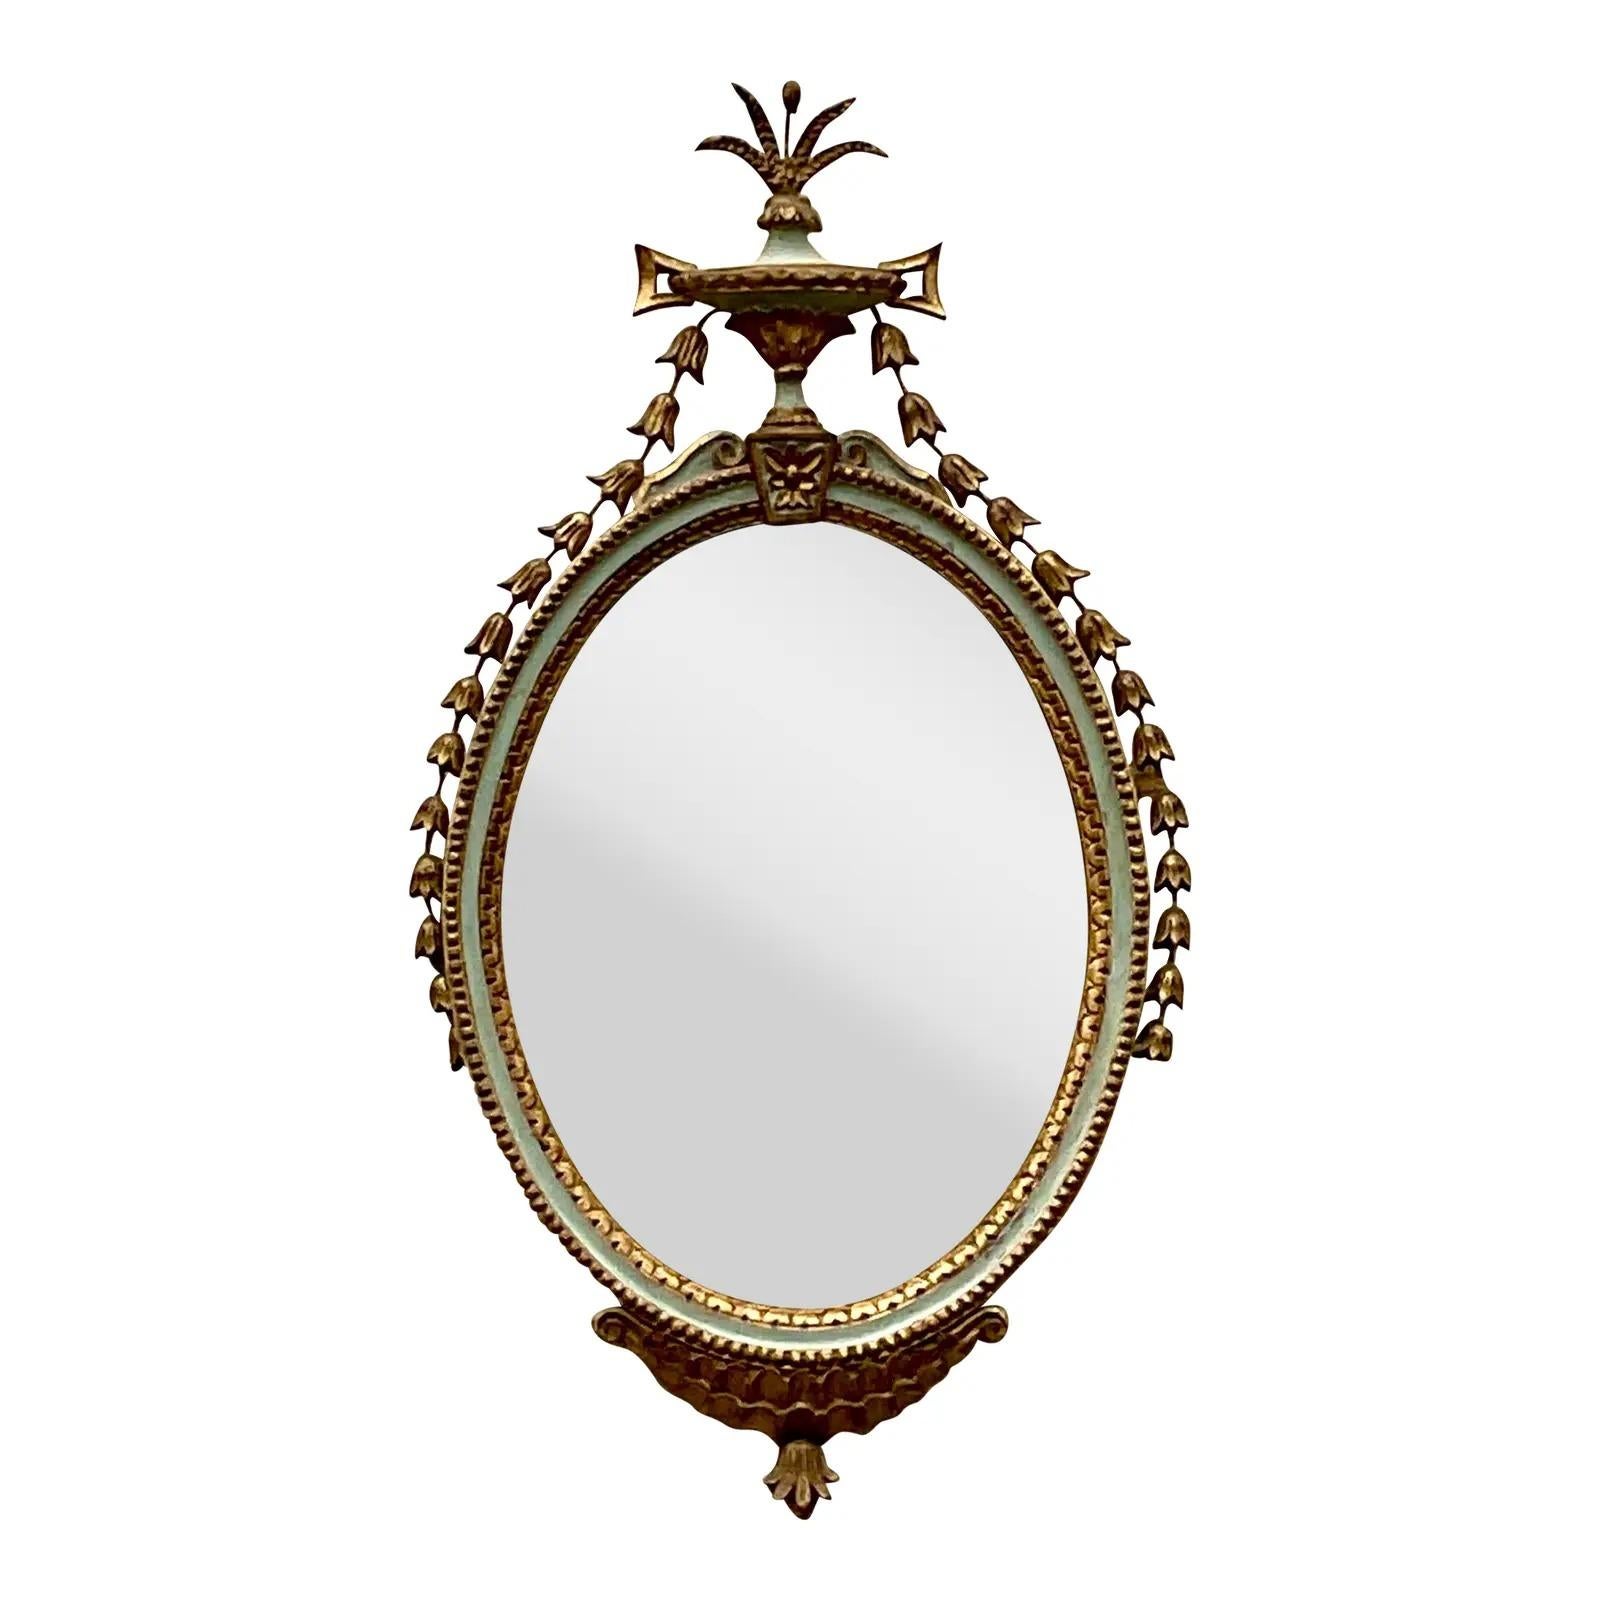 Fantastic vintage Georgian mirror. Beautiful pale grey with gilt touches. Chic hand carved garlands and flora. A real collectors item. Acquired from a Palm Beach estate.